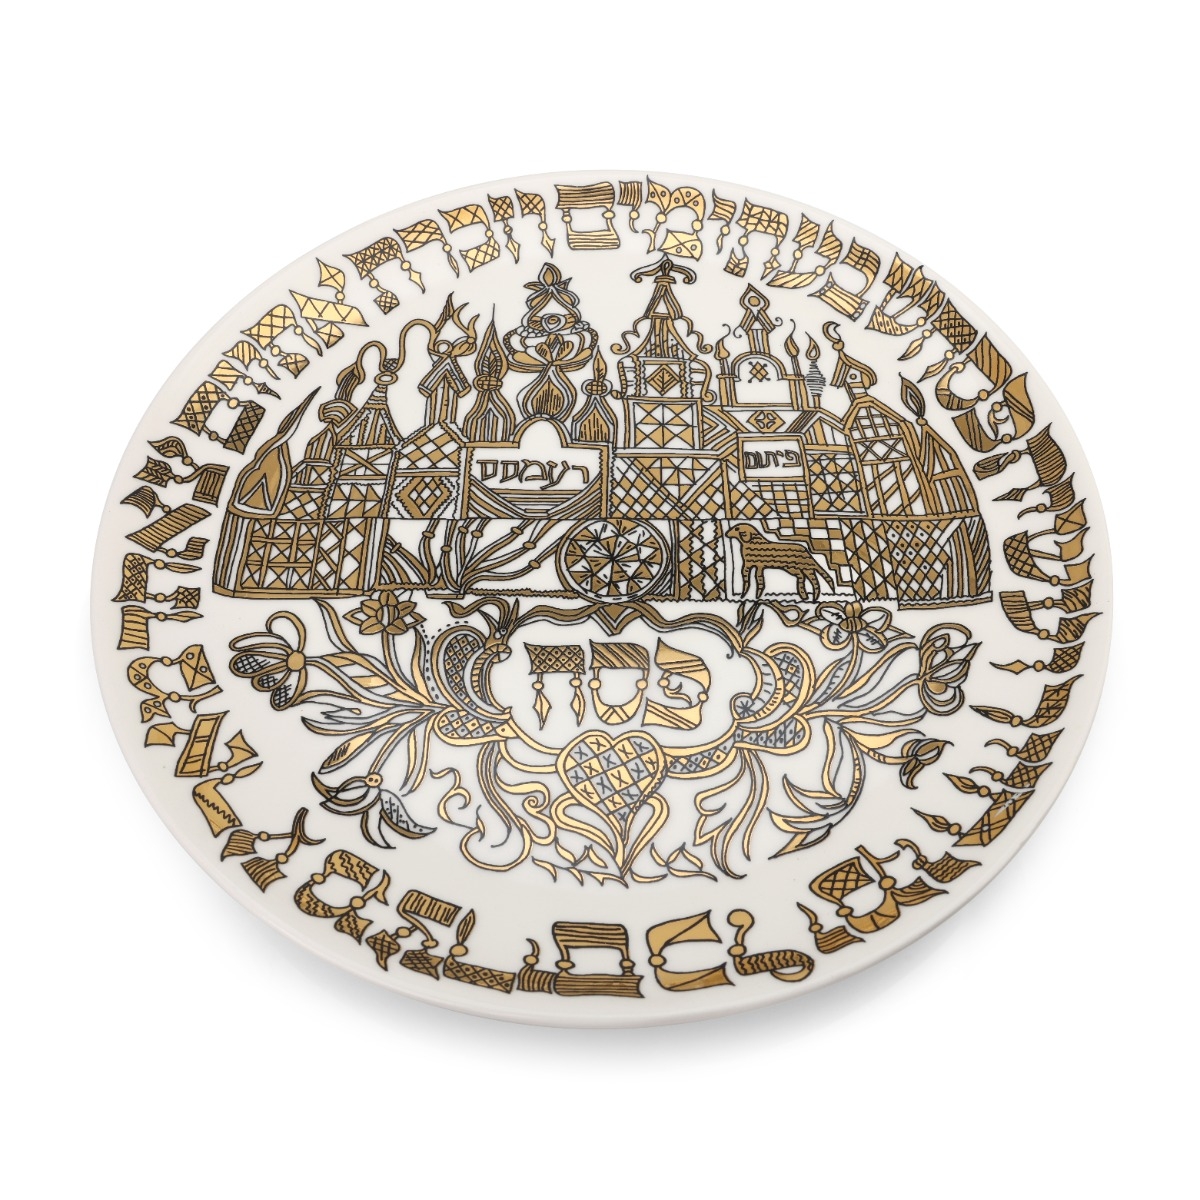 Israel Museum Porcelain Pitom and Ramses Passover Seder Plate Adaptation, Germany 1769 (Choice of Matching Dishes and Color) - 2